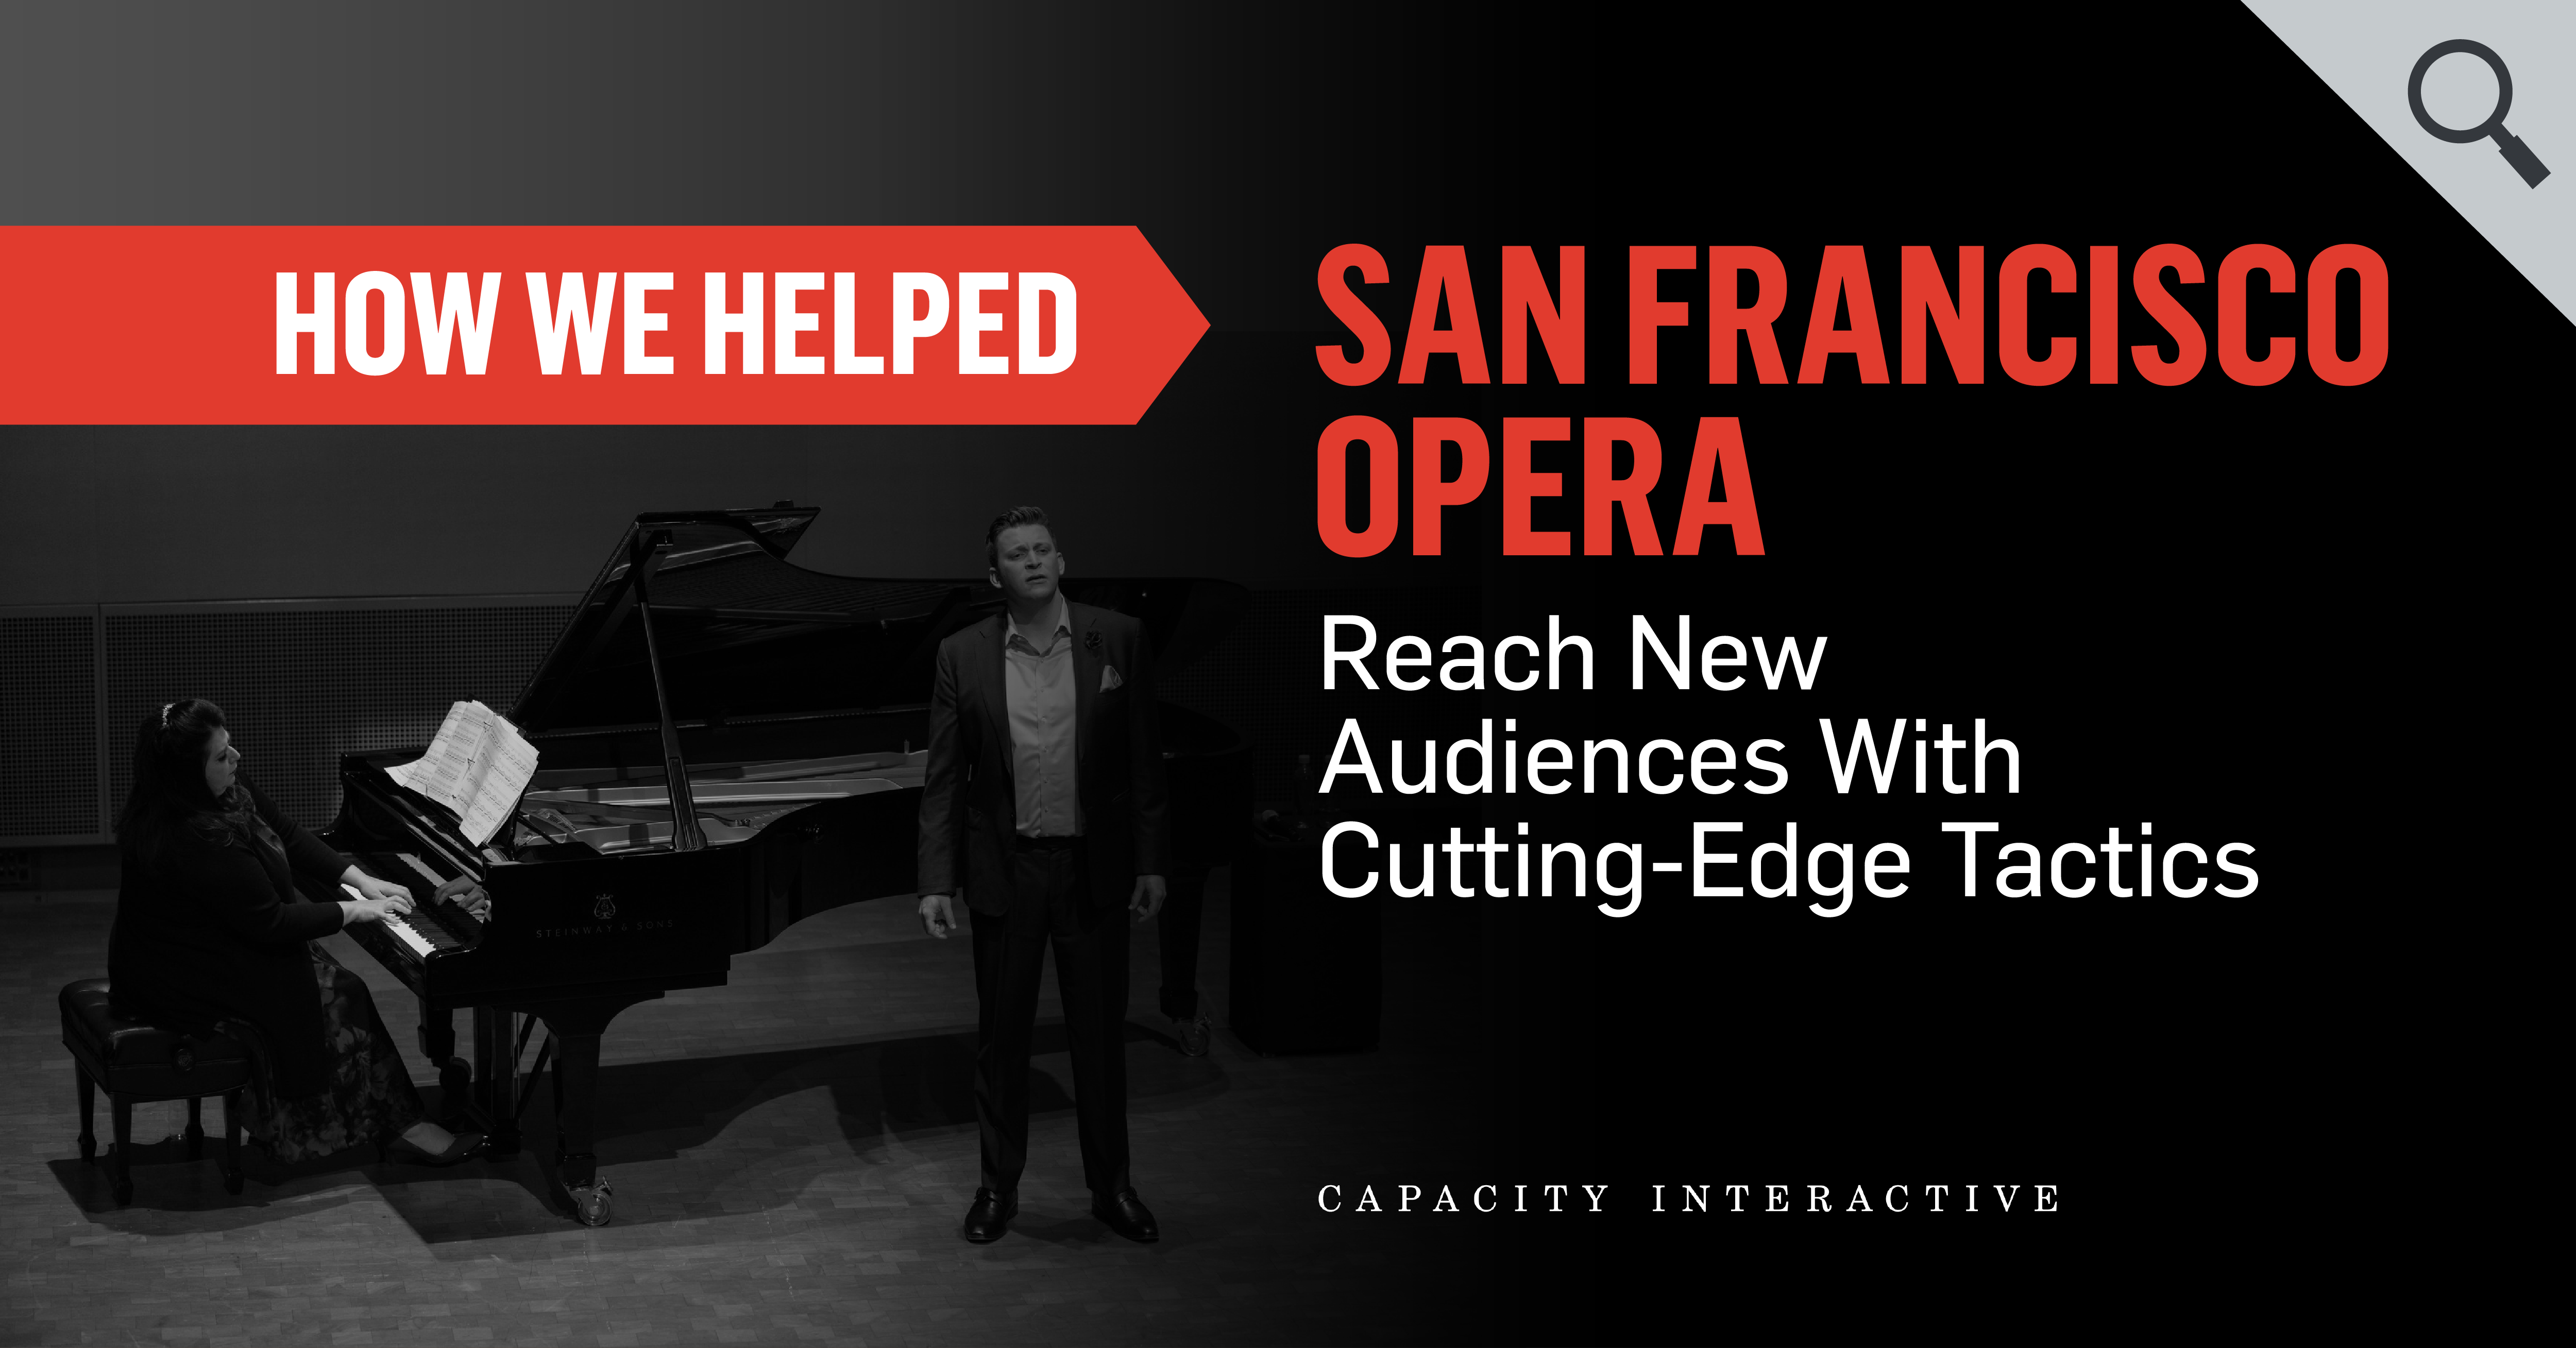 How We Helped San Francisco Opera Reach New Audiences With Cutting-Edge Tactics